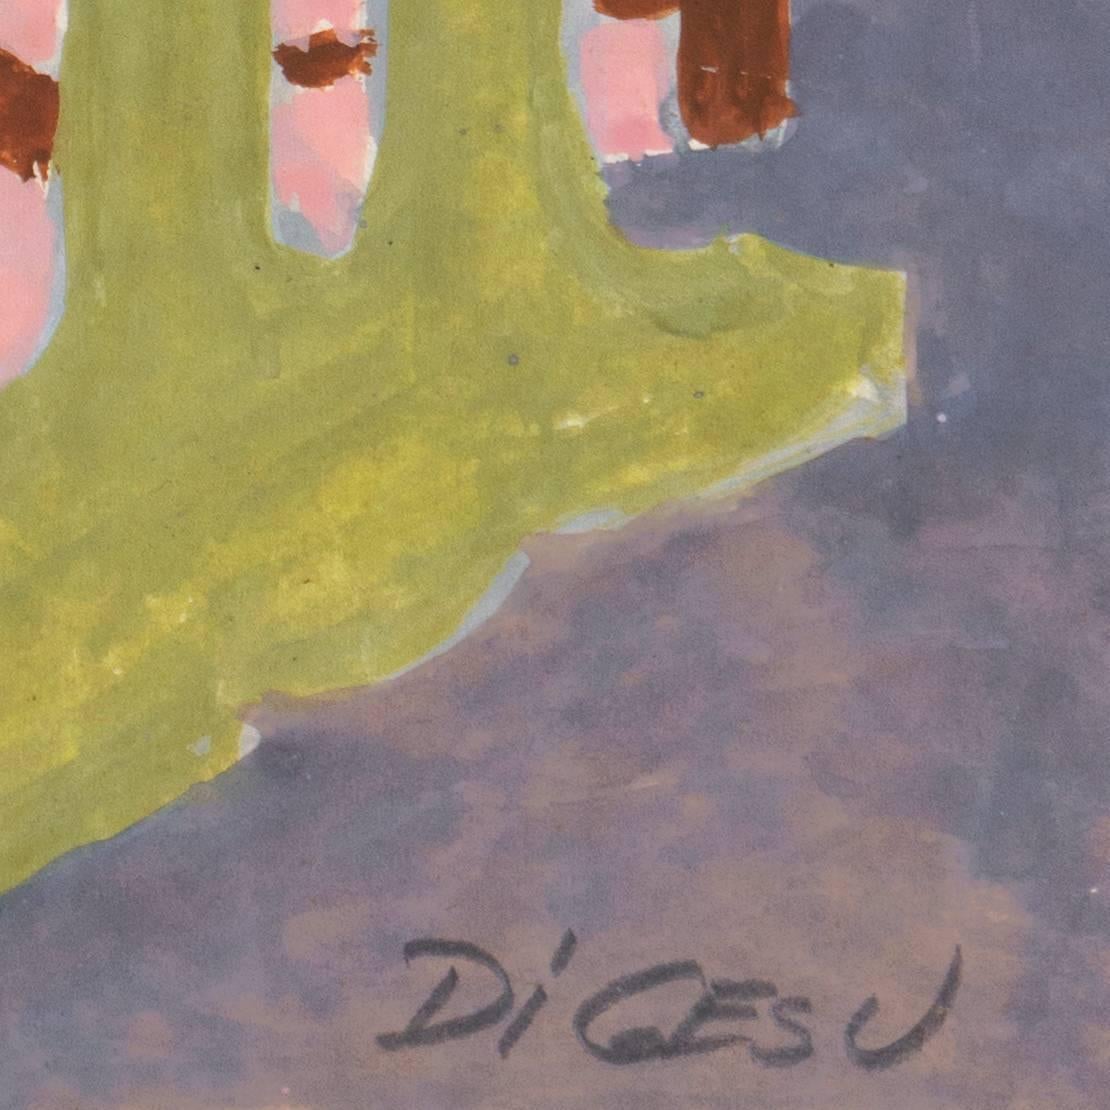 Signed lower right, "Di Gesu" and painted circa 1955. Victor Di Gesu estate stamp verso. 

Winner of the Prix Othon Friesz, Victor di Gesu first attended the Chouinard Art School before moving to Paris where he studied with Andre L’Hote